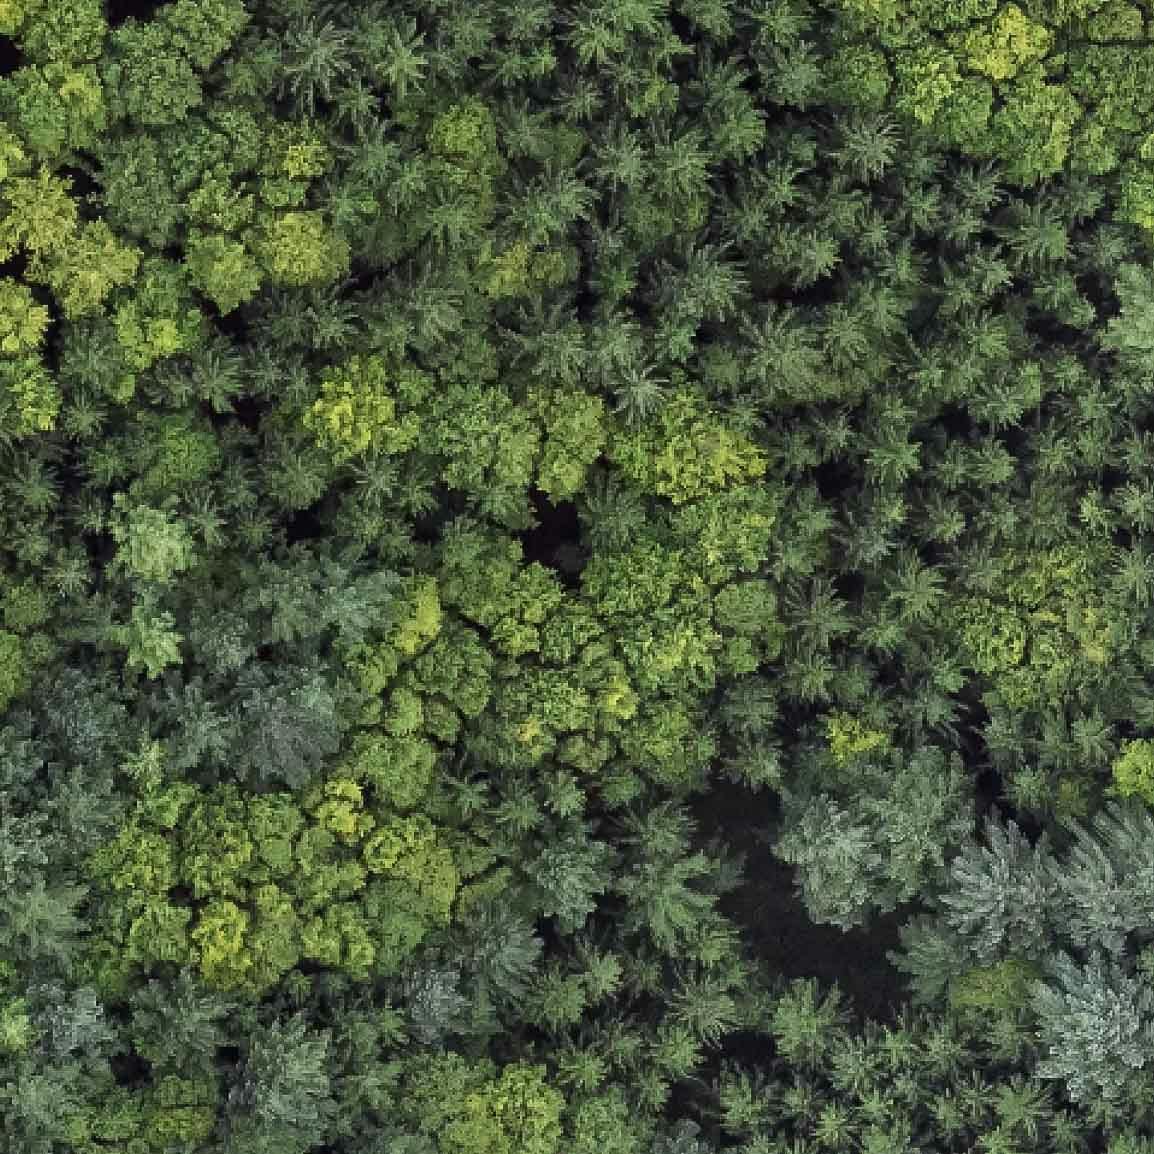 Aerial image of a mixed forest.